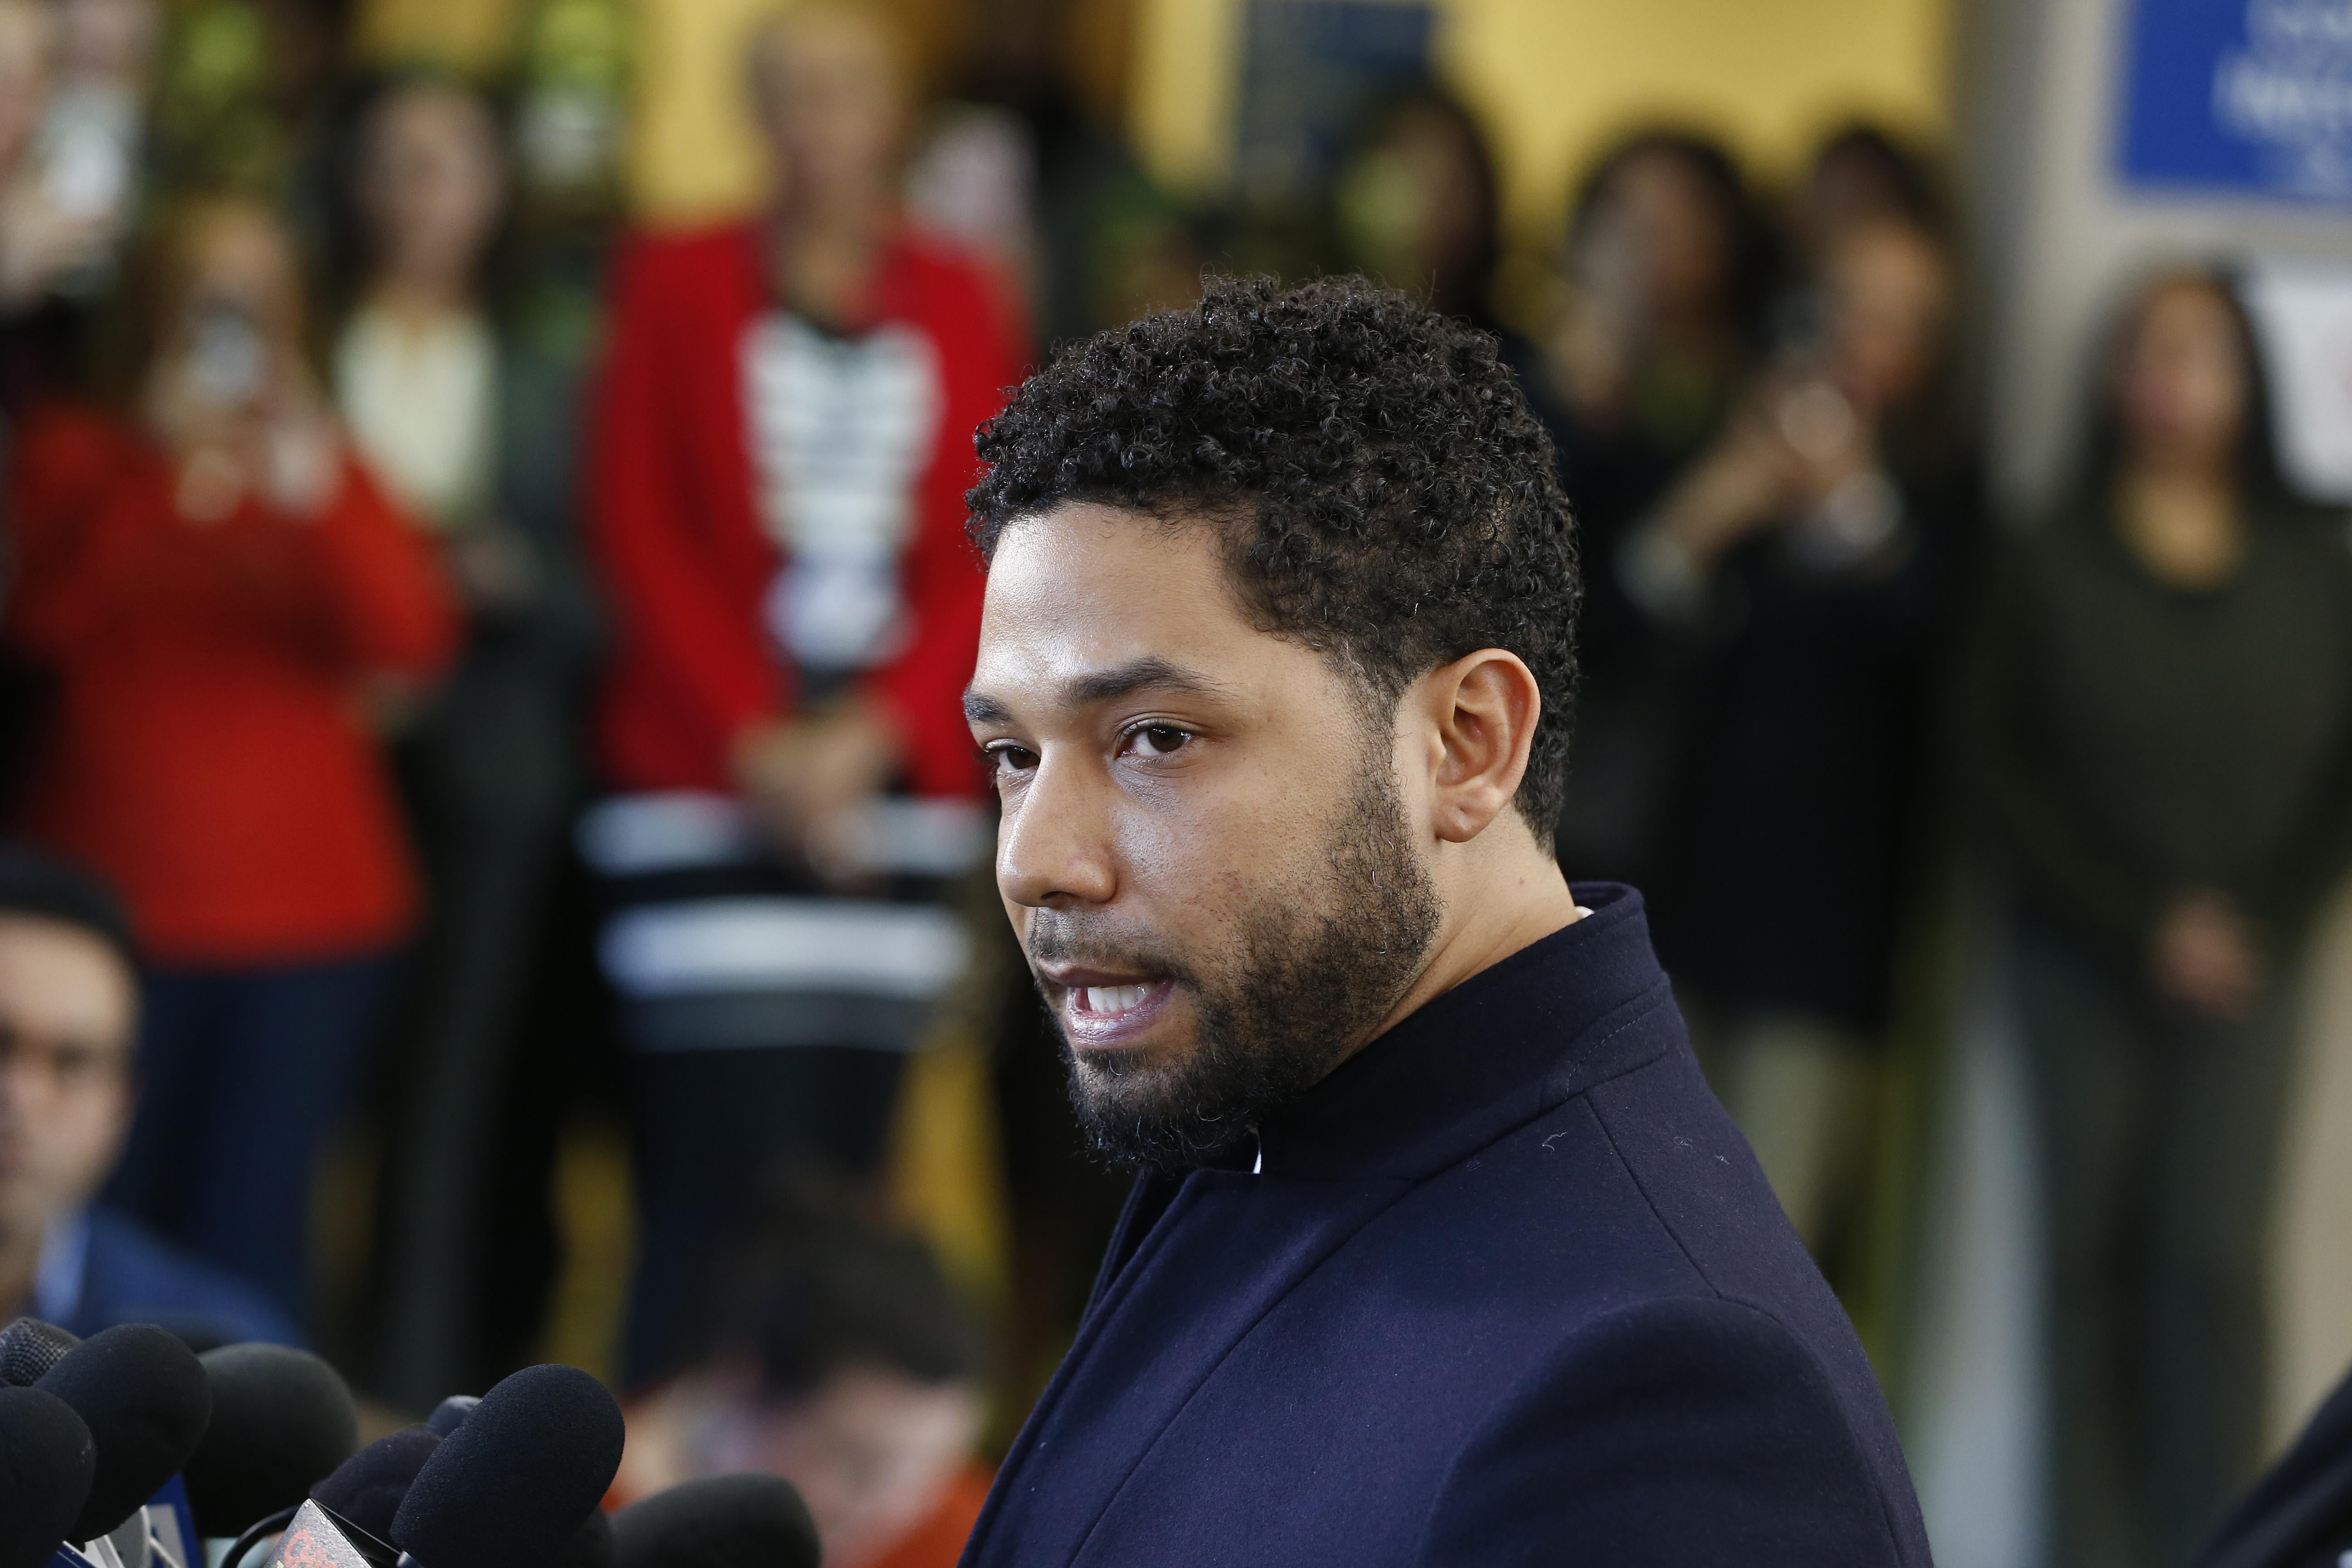 Actor Jussie Smollett stands in front of a microphone at a press conference.